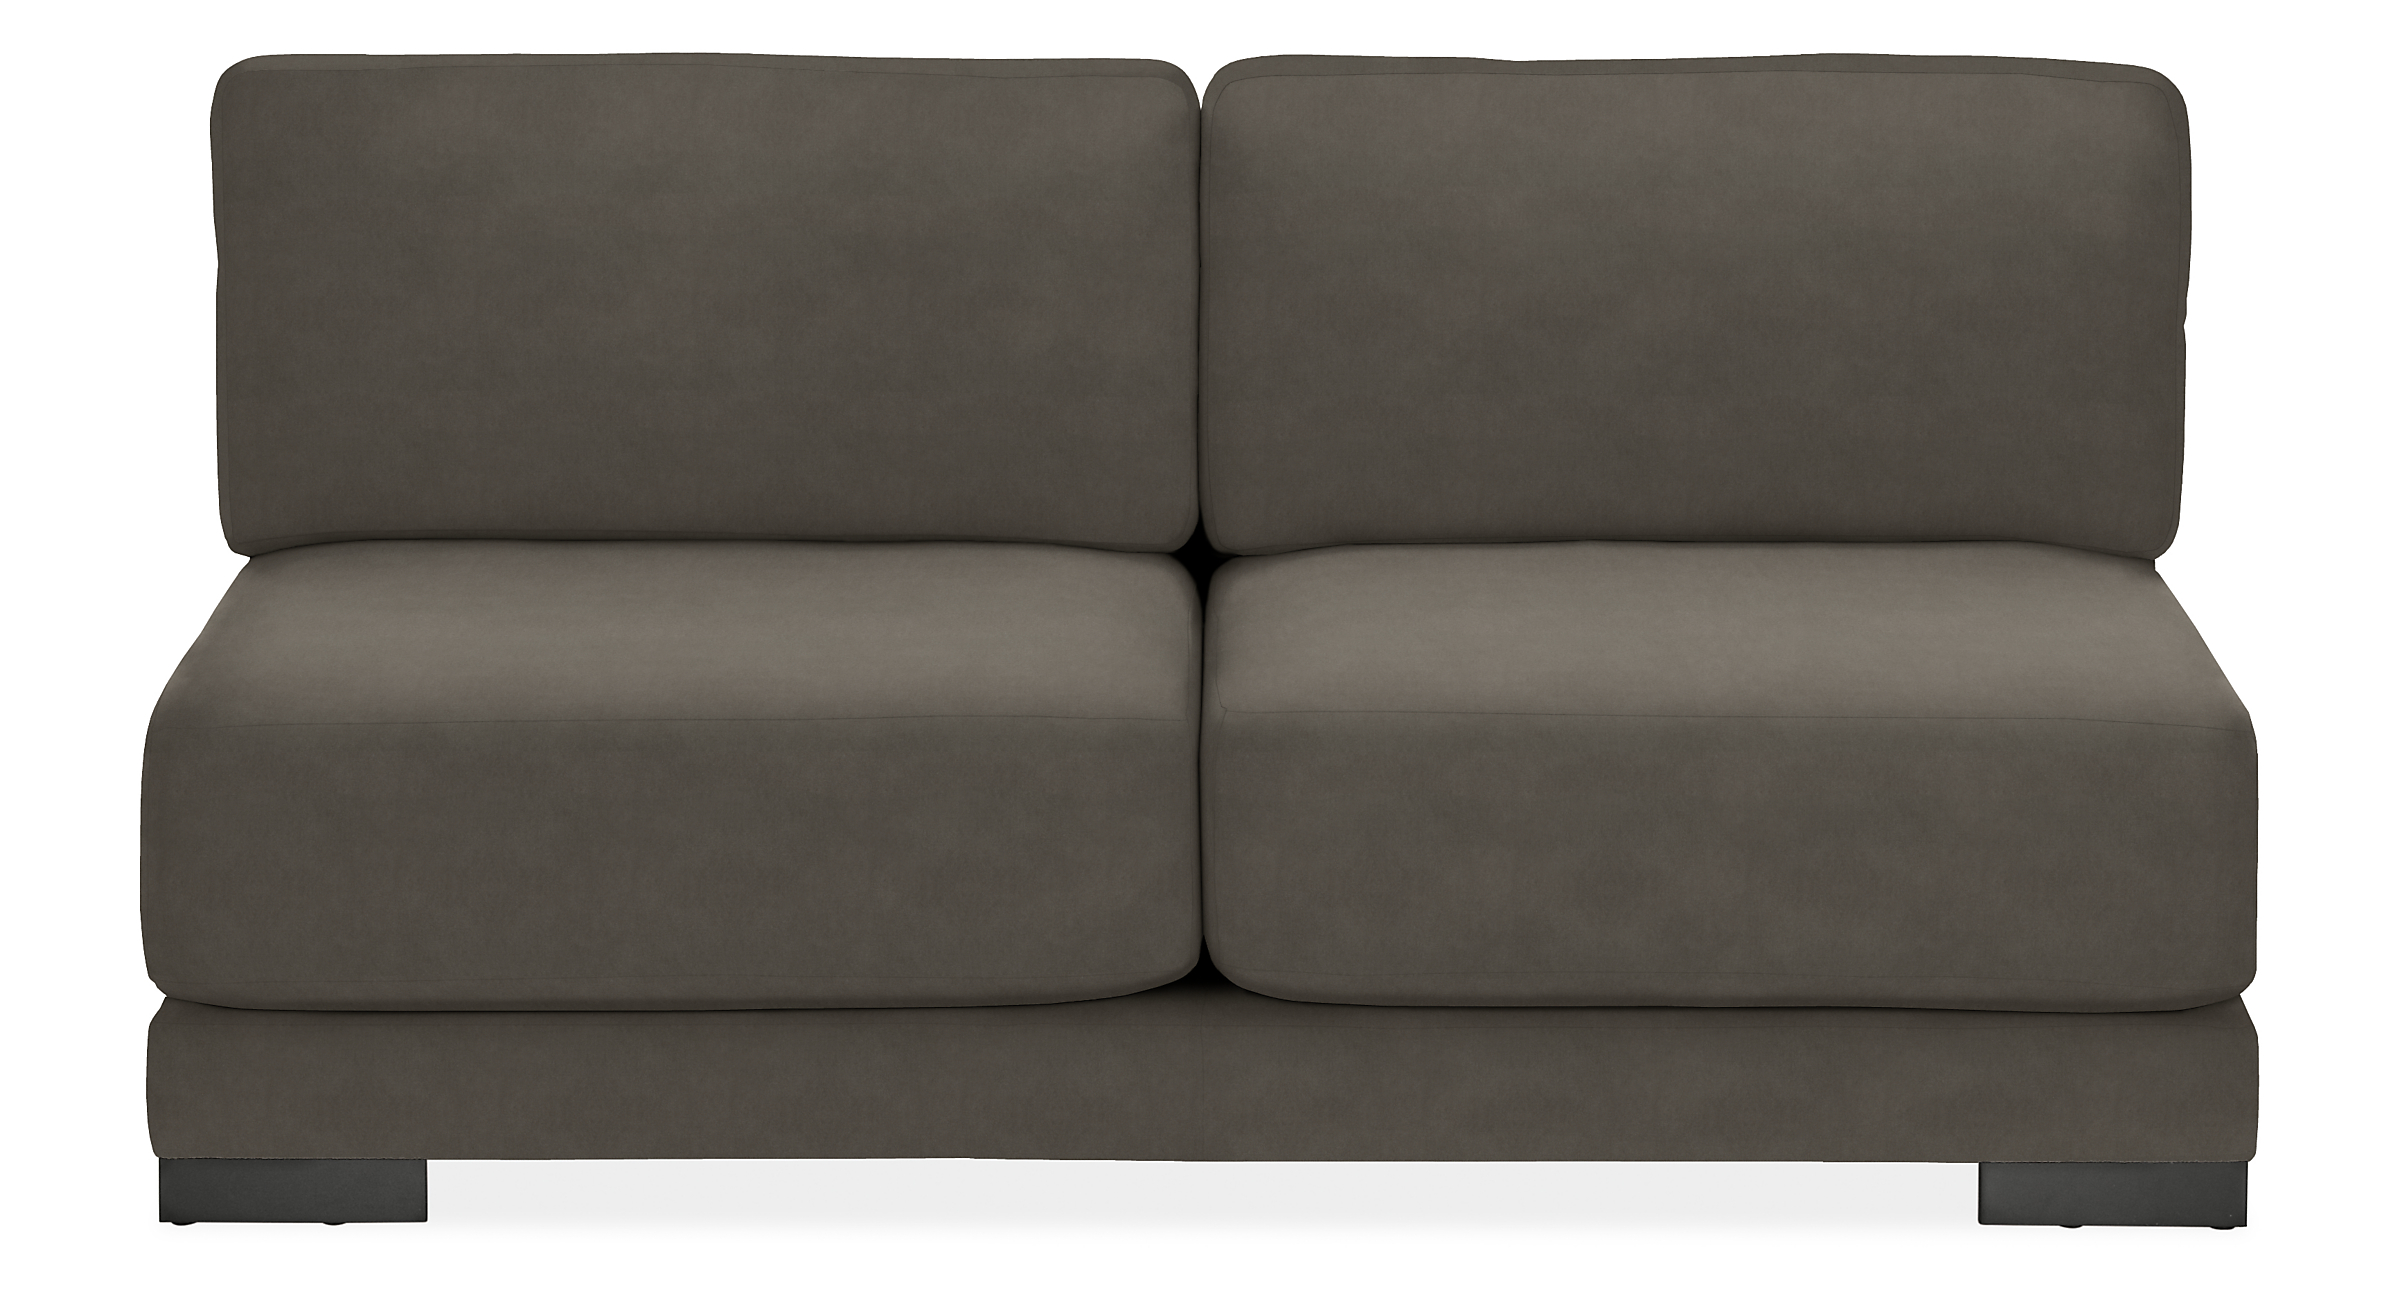 Mira 64" Armless Loveseat in Banks Charcoal with Charcoal Legs